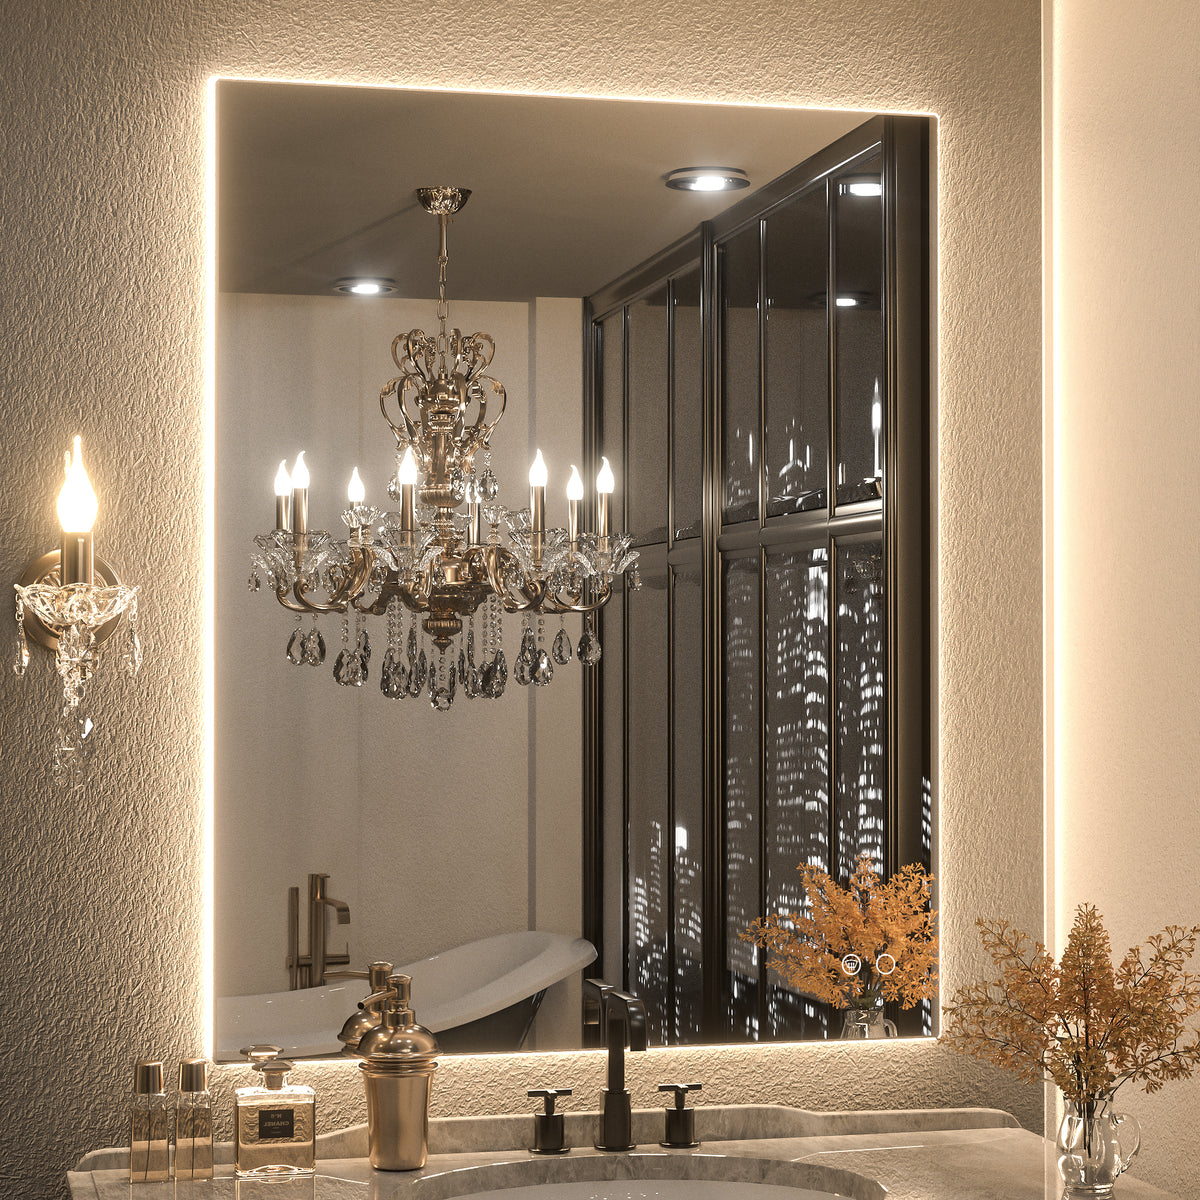 30”x36 Led Bathroom Mirror with Antifog, Dimmer, Adjustable Color Temperature, Smart Bathroom Led Mirror with Brush Gold Frame - 3